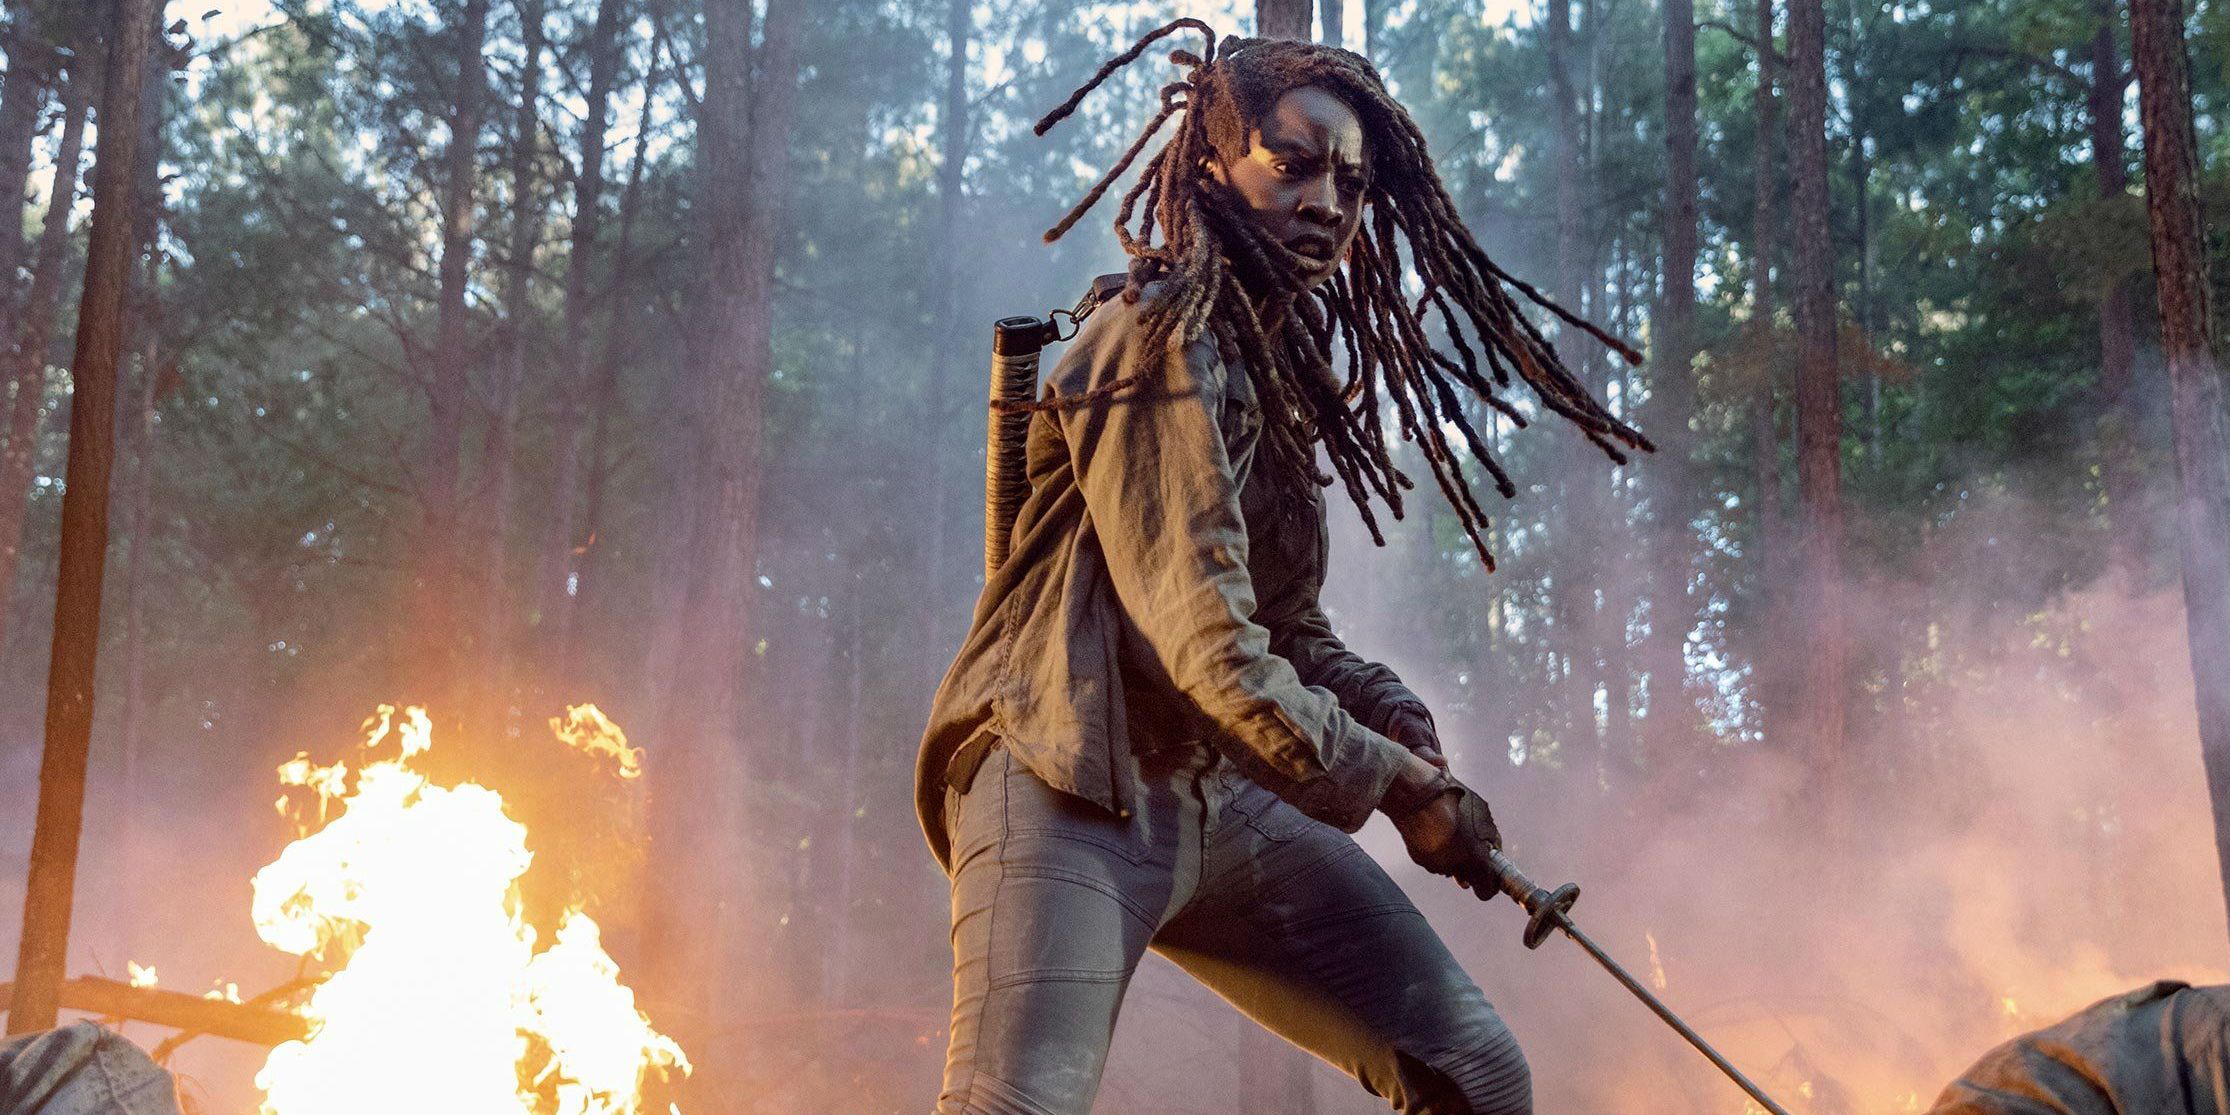 The Walking Dead Season 10: 5 Things We Want To See (& 5 We Don’t)